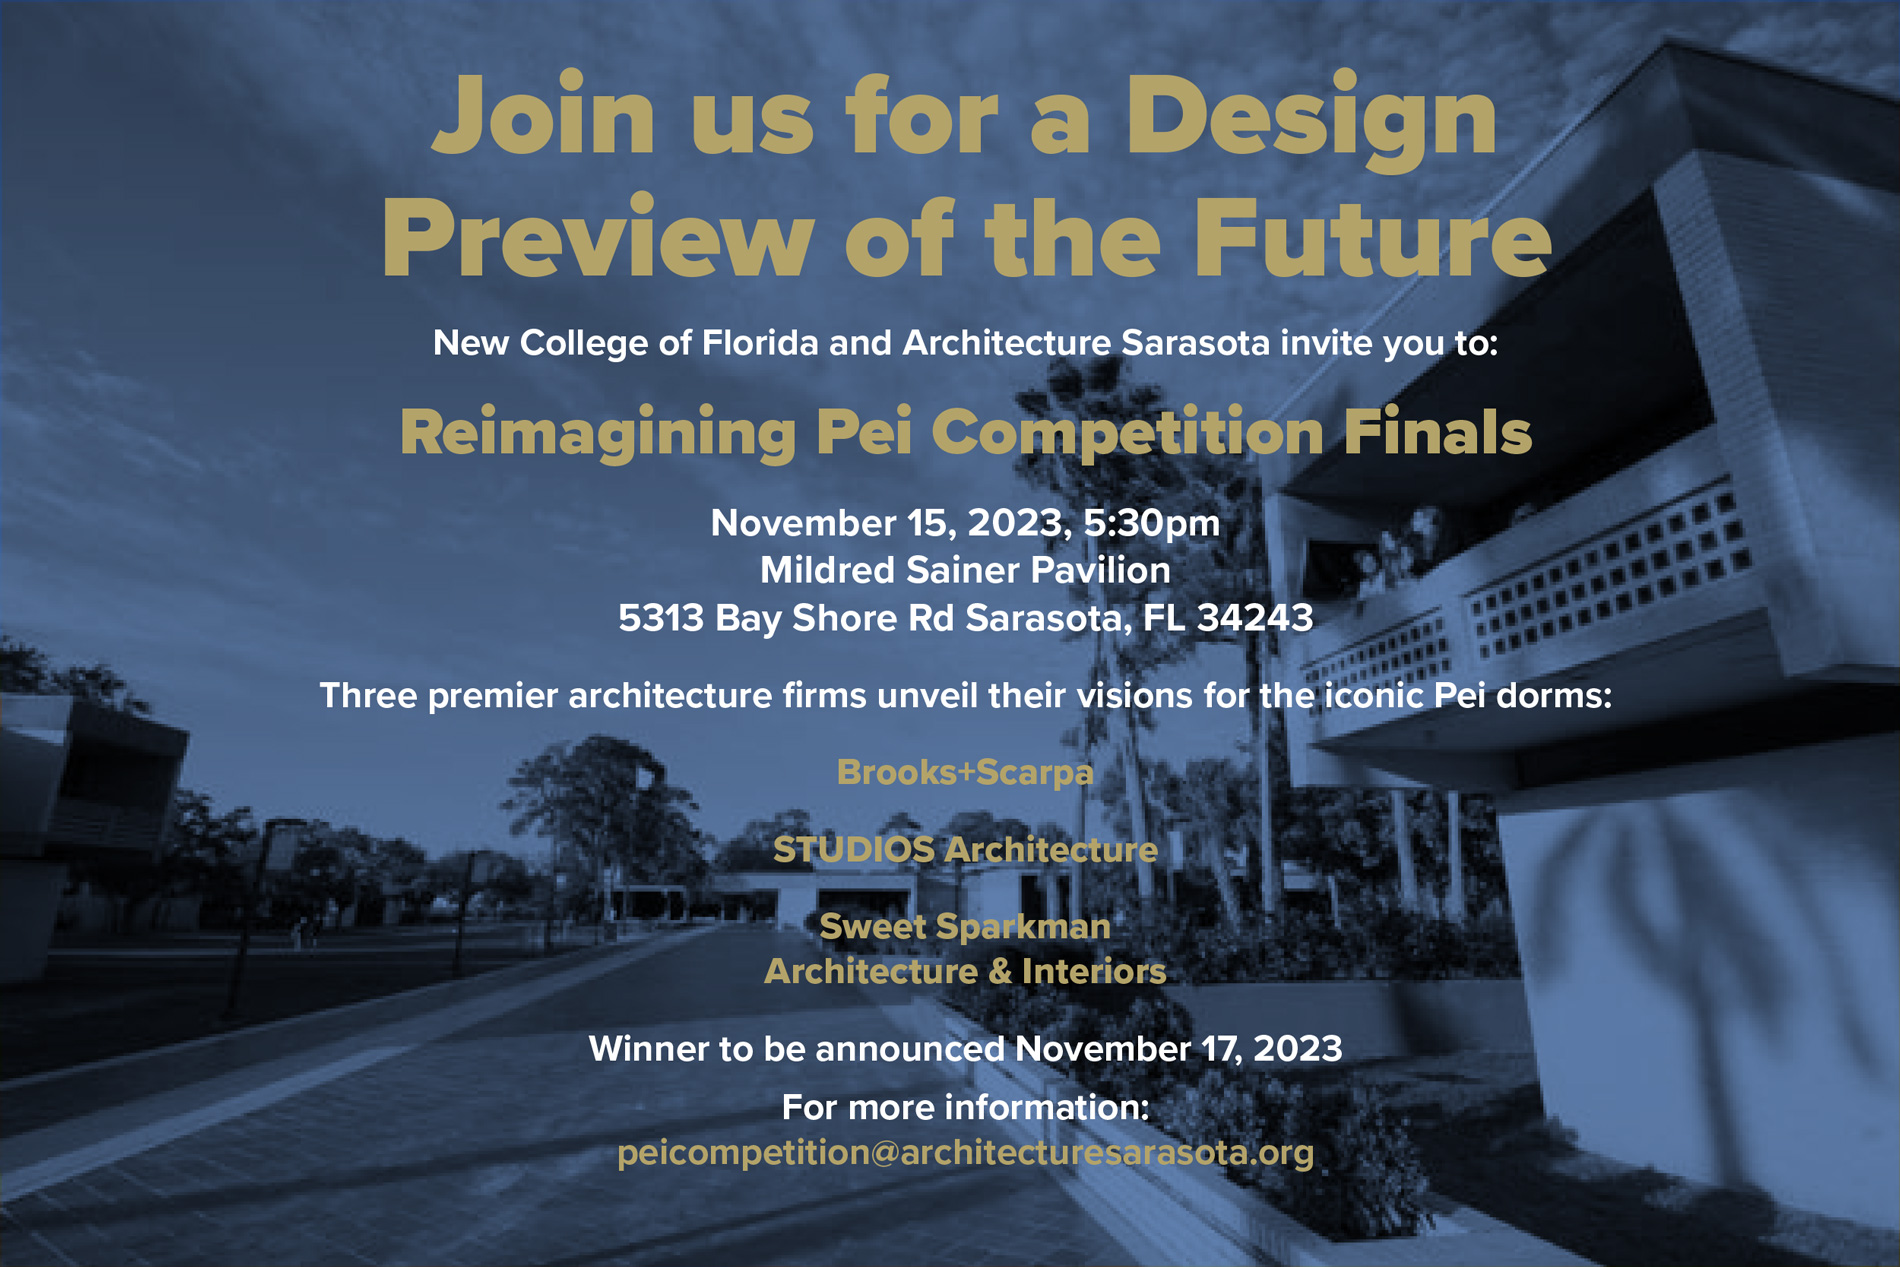 Invitation for the Reimagining Pei Competition Finals November 15th, 2023, 5:30pm Mildred Sainer Pavilion